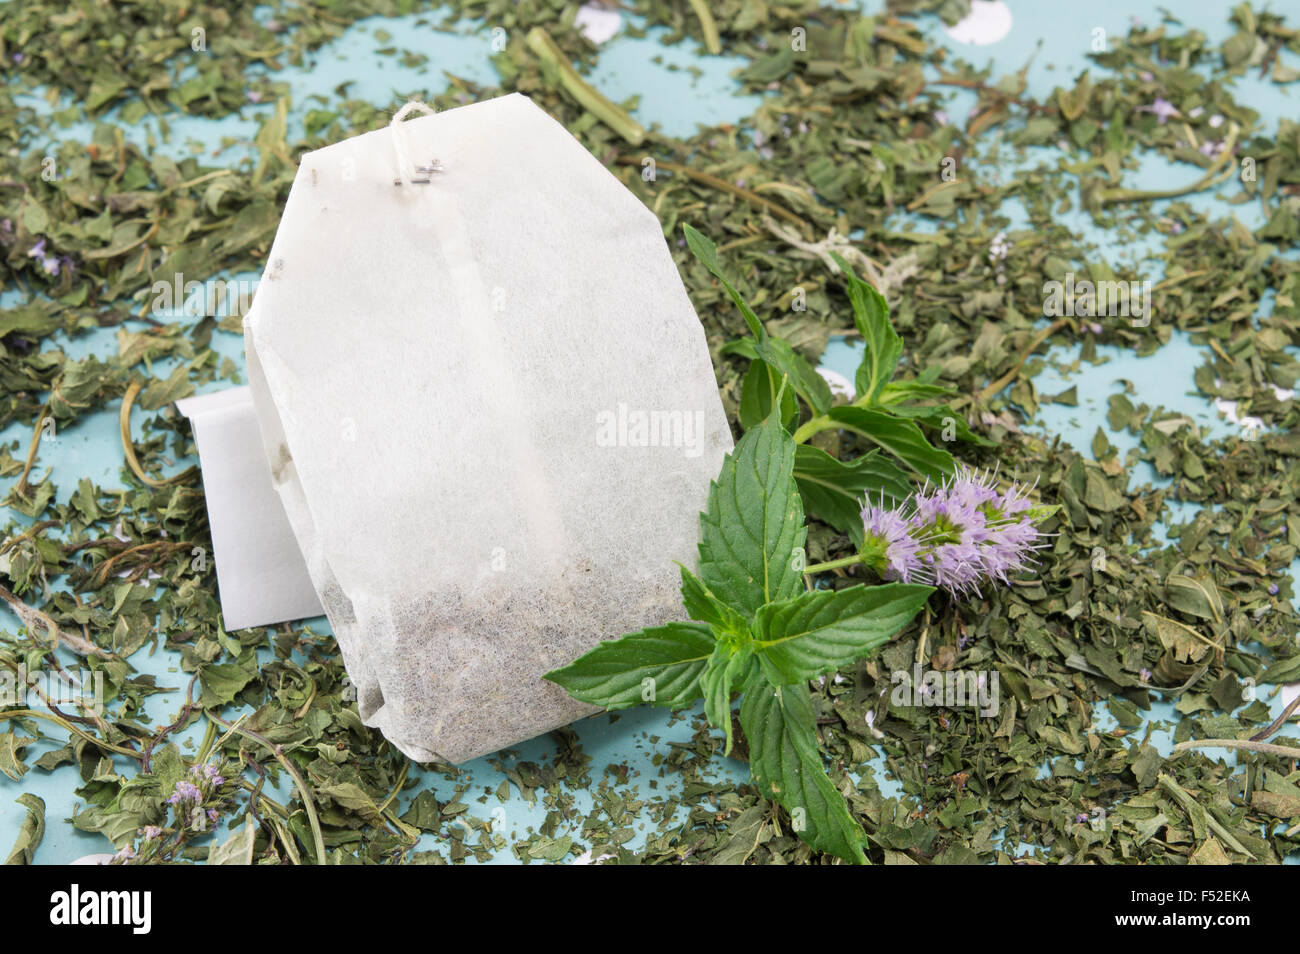 Mint tea bag and fresh mint plant on the table Stock Photo